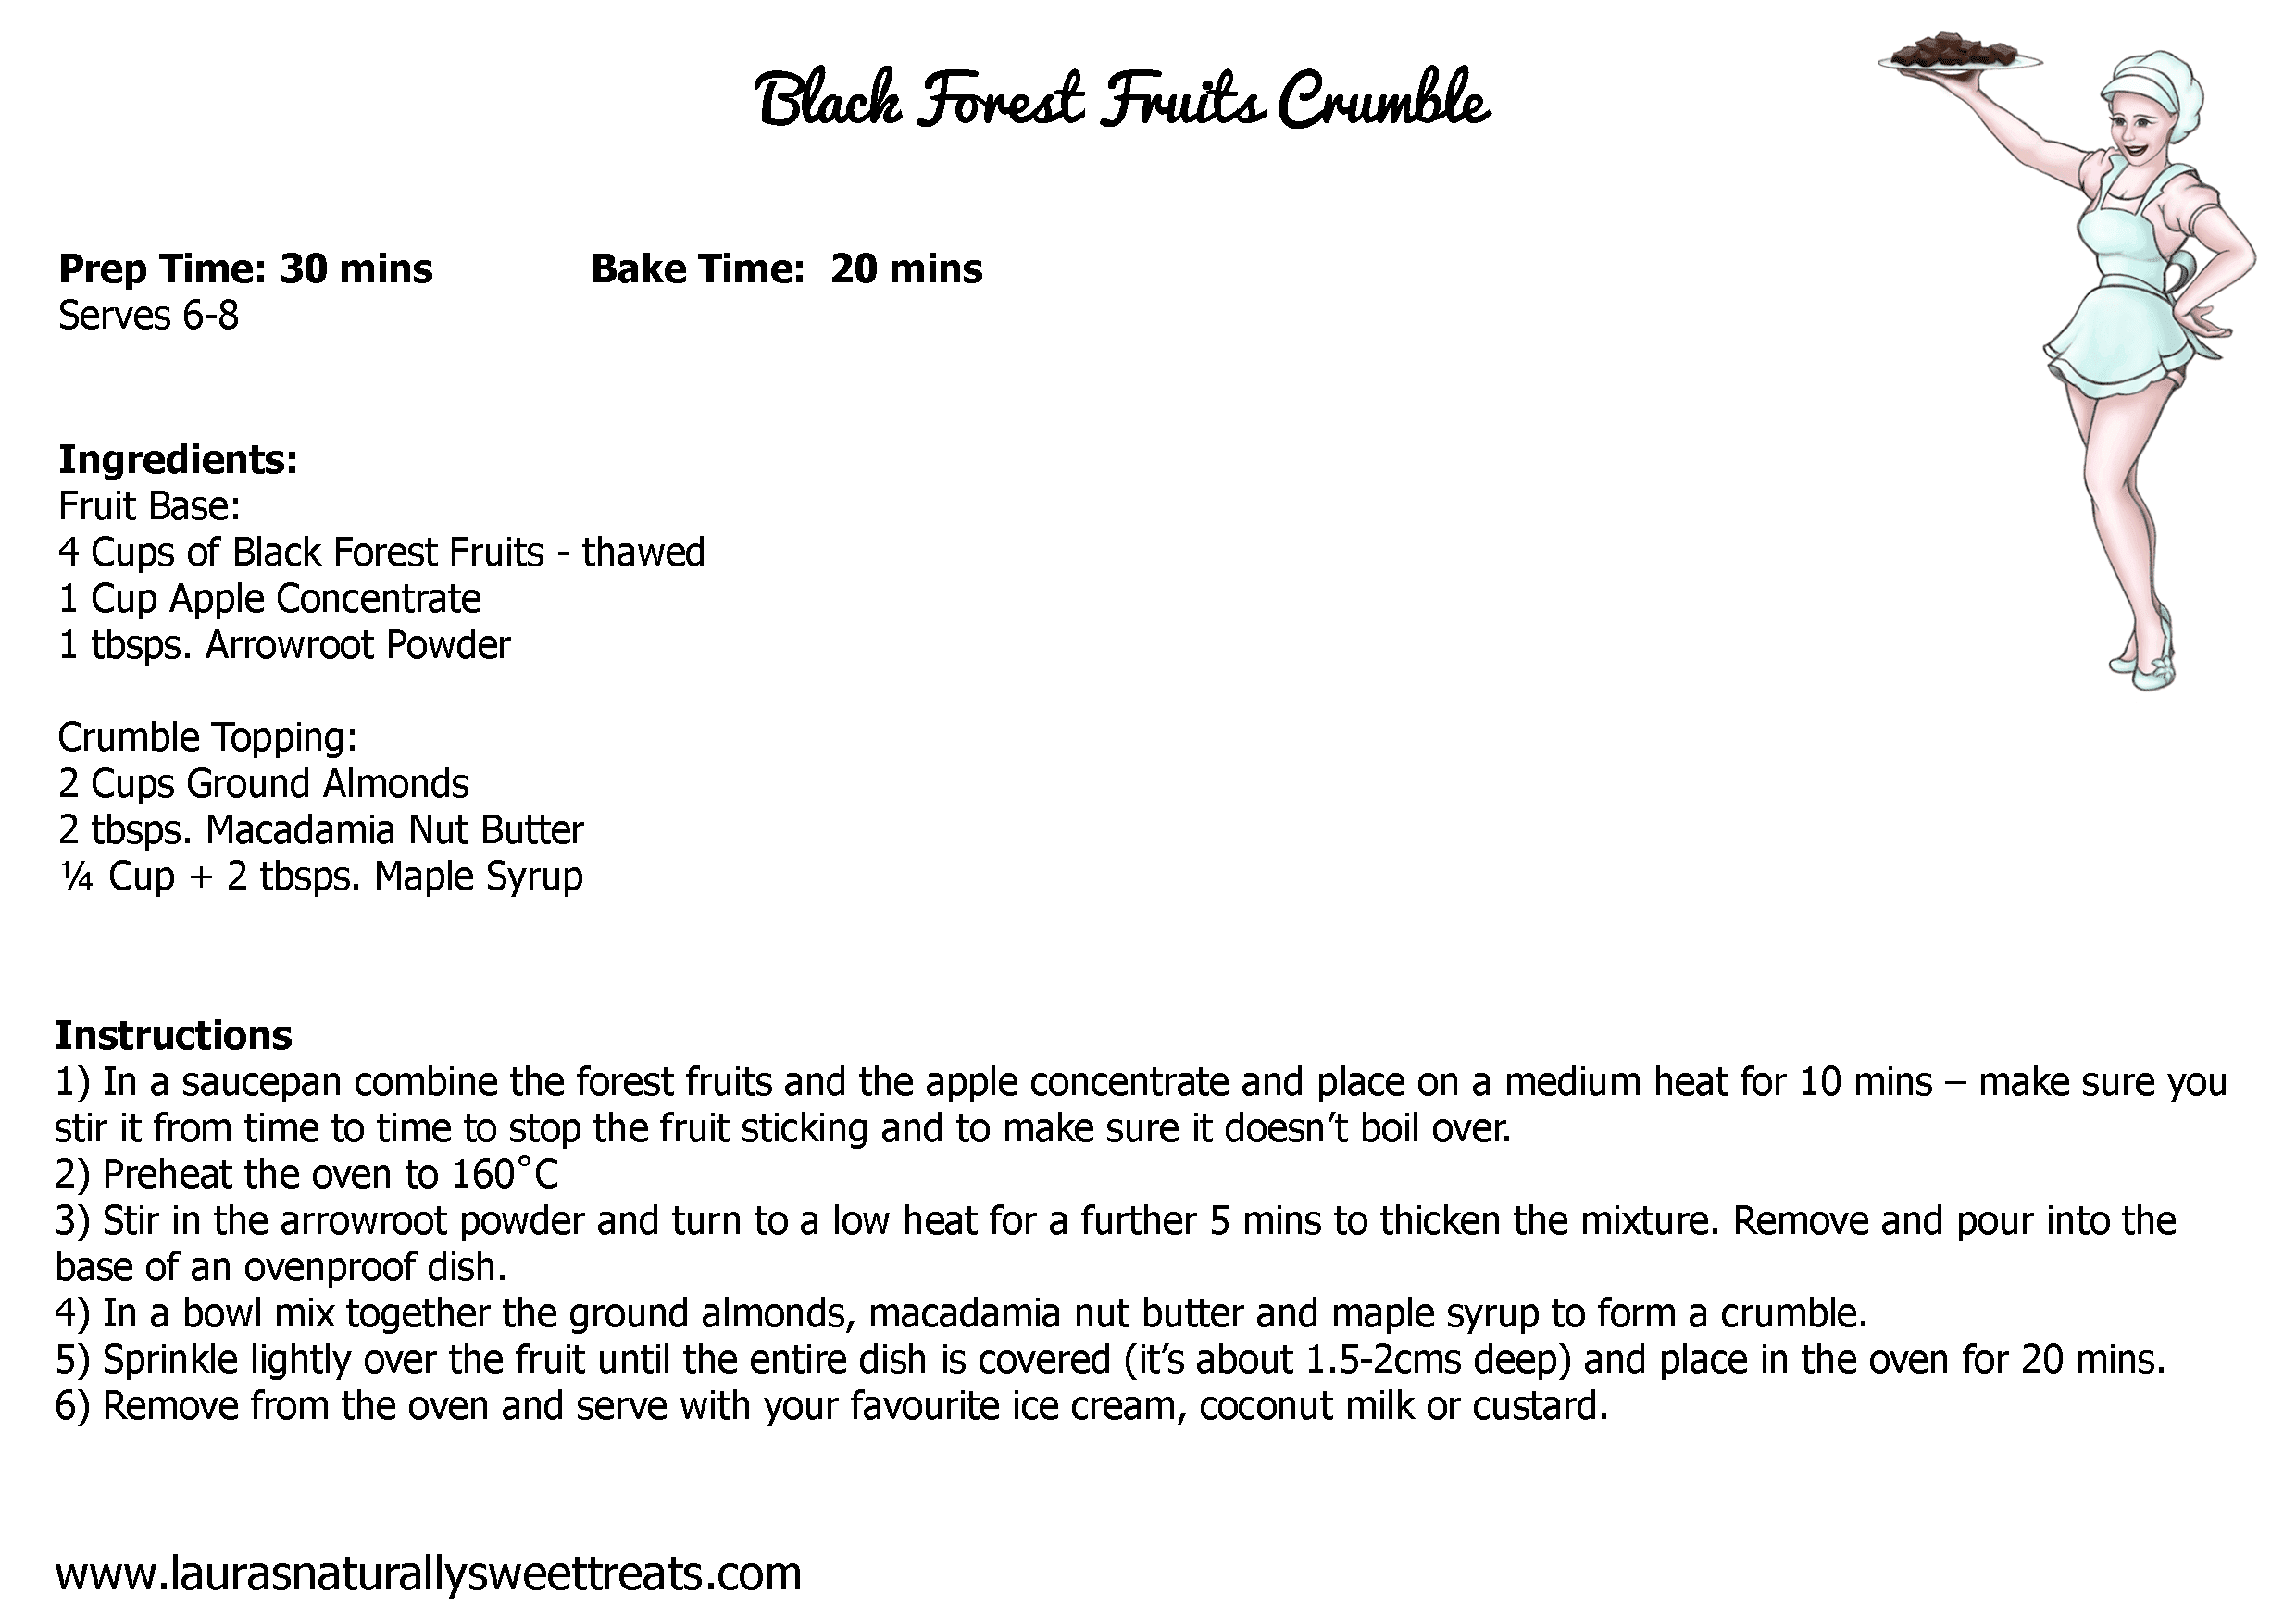 black forest fruits crumble recipe card